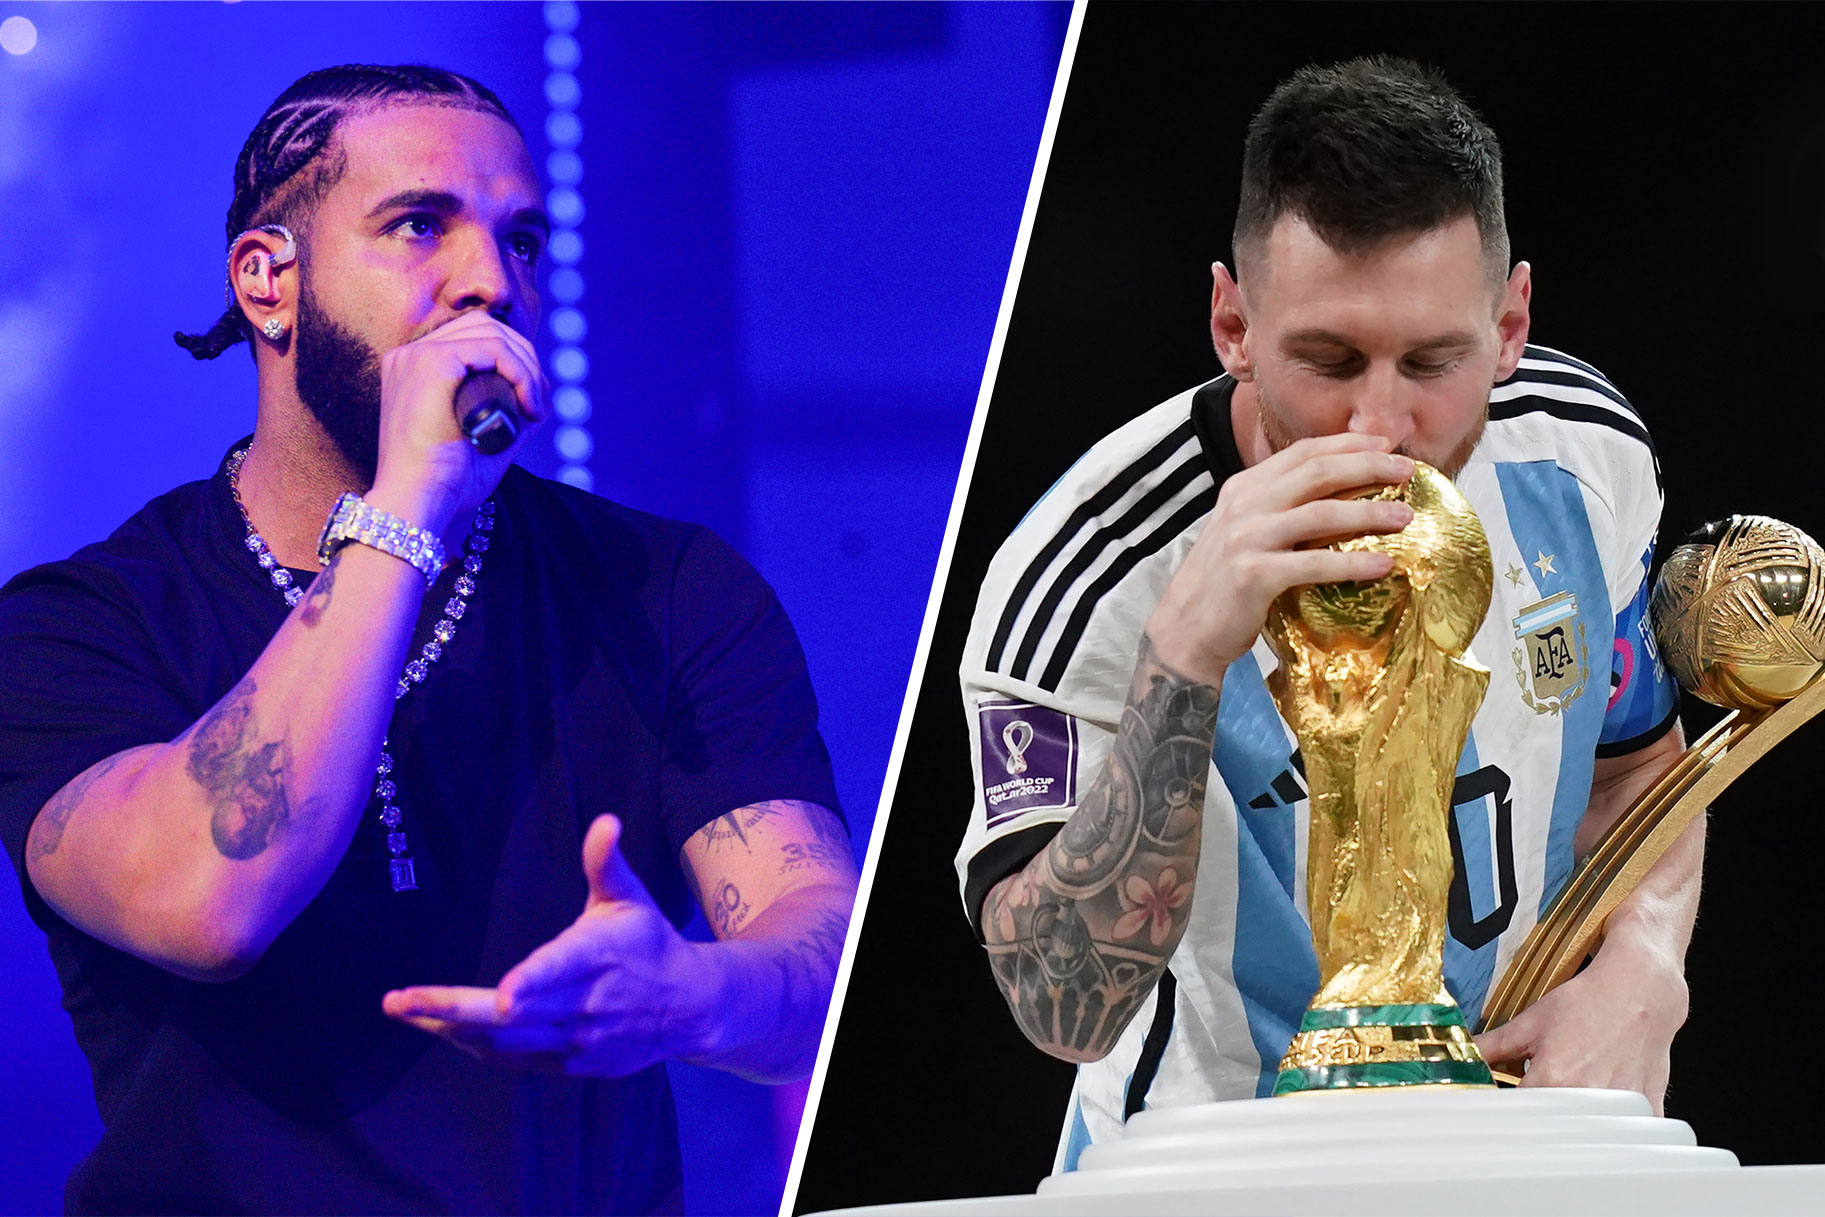 Split Image of Drake performing and Lionel Messi kissing the World Cup Trophy